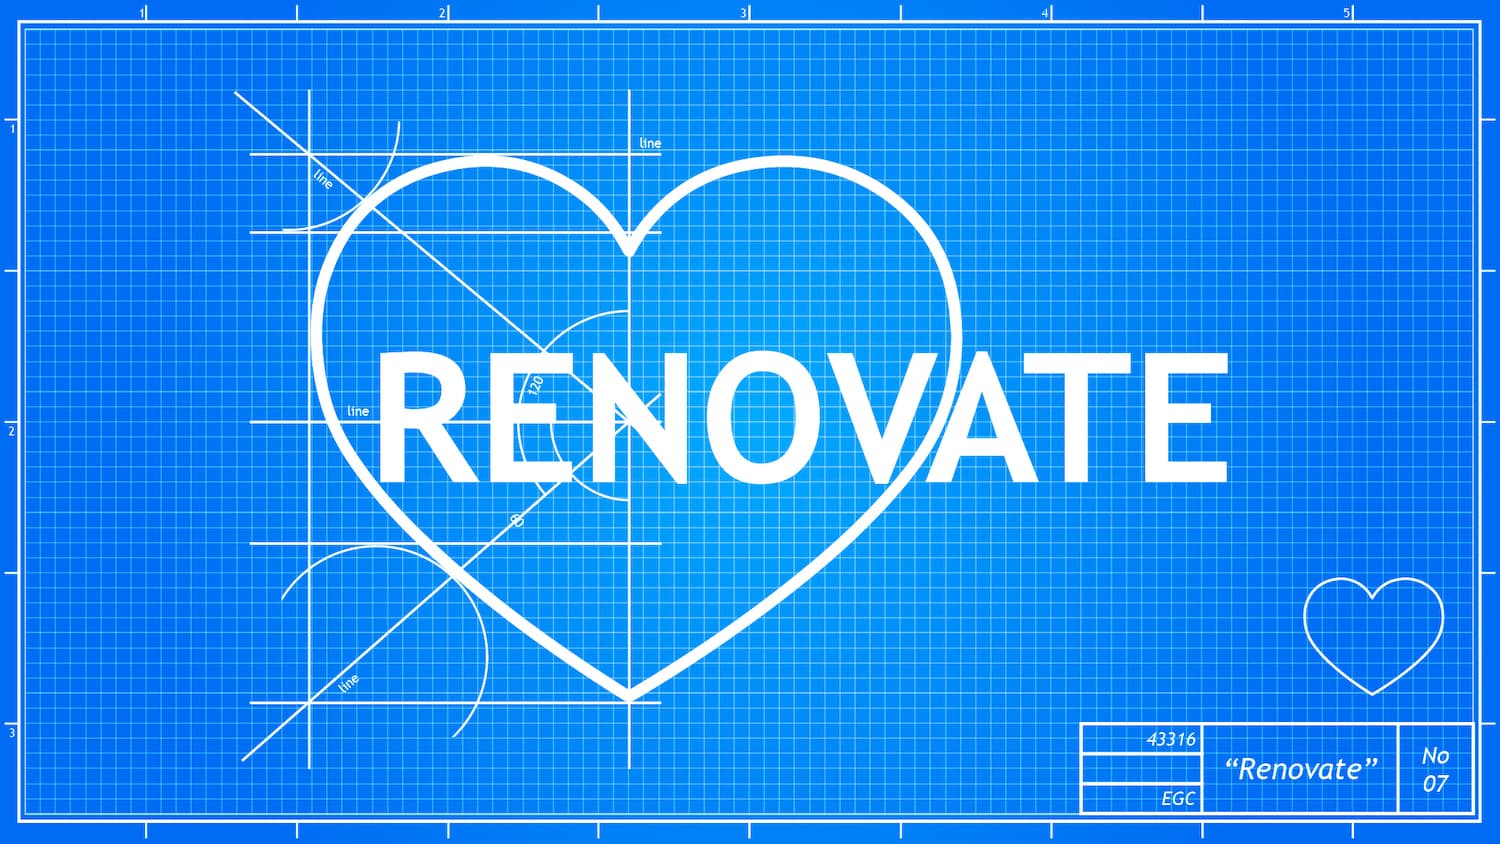 We all tend to think that if we could renovate our house, or our job, or our marriage, or our ..., then we’d be happy, but the truth is that life is not lived from the outside - in, but from the inside - out. We live from our hearts. So what does it mean to let God renovate, to transform our hearts? It means to have the heart of Christ, the character of Christ formed in you.

Join us with our 40-day Renovate Journal.